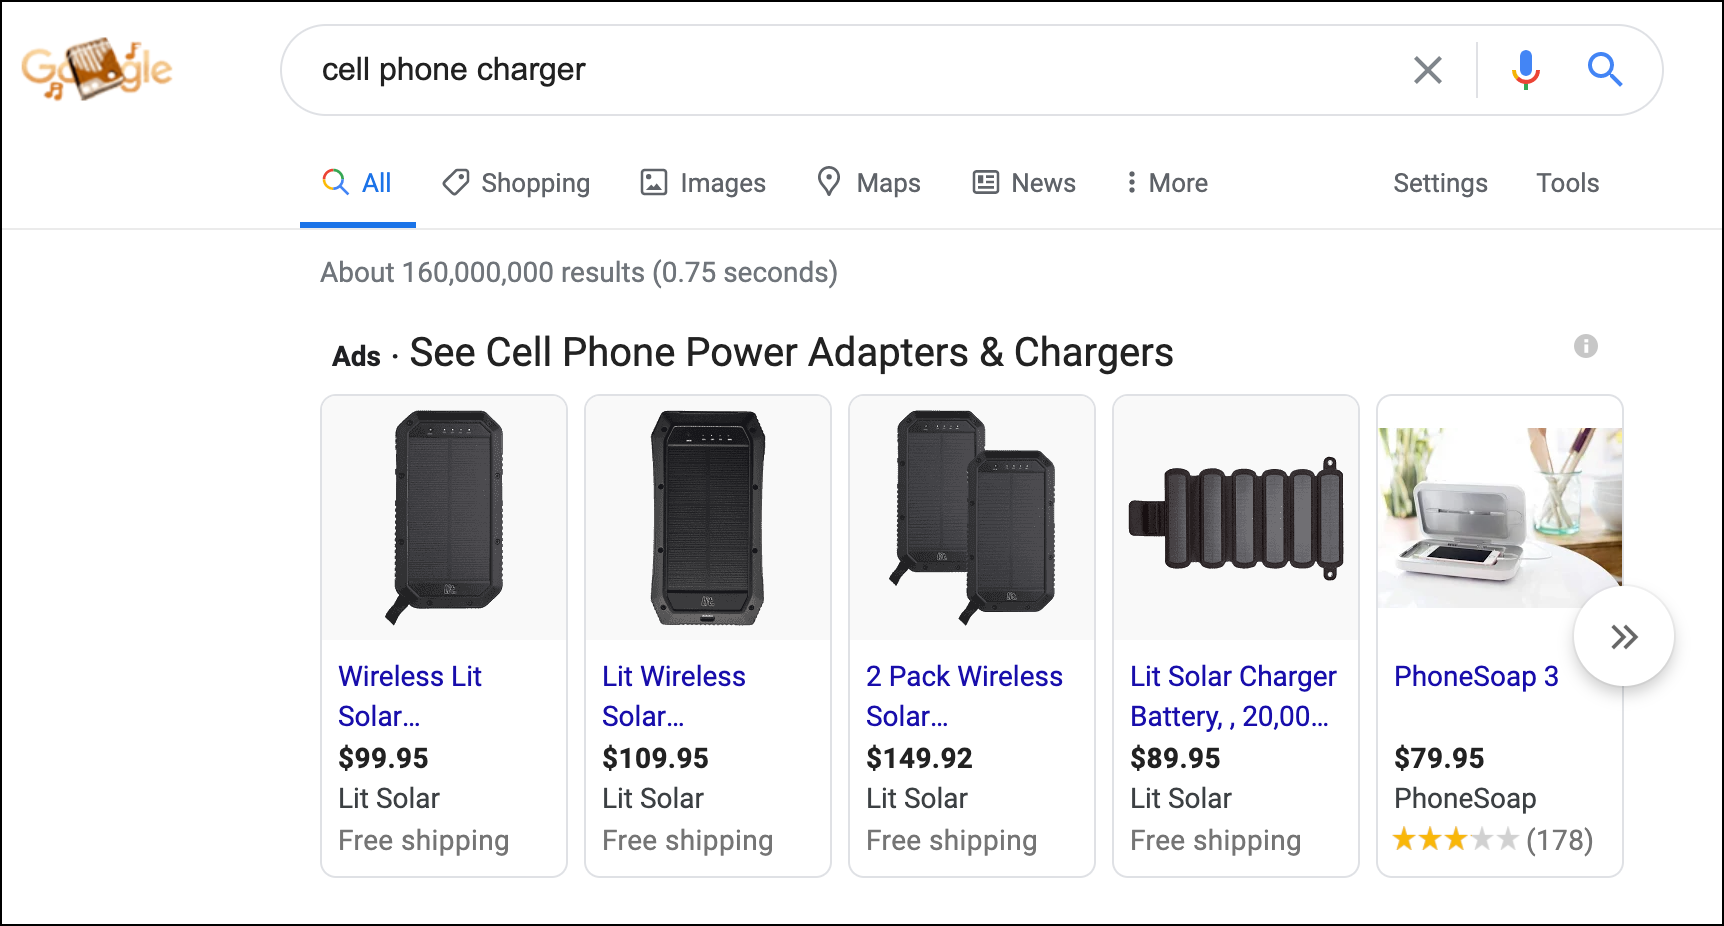 The image tiles below the "cell phone charger" phrase are PLA ads or Google Shopping ads.